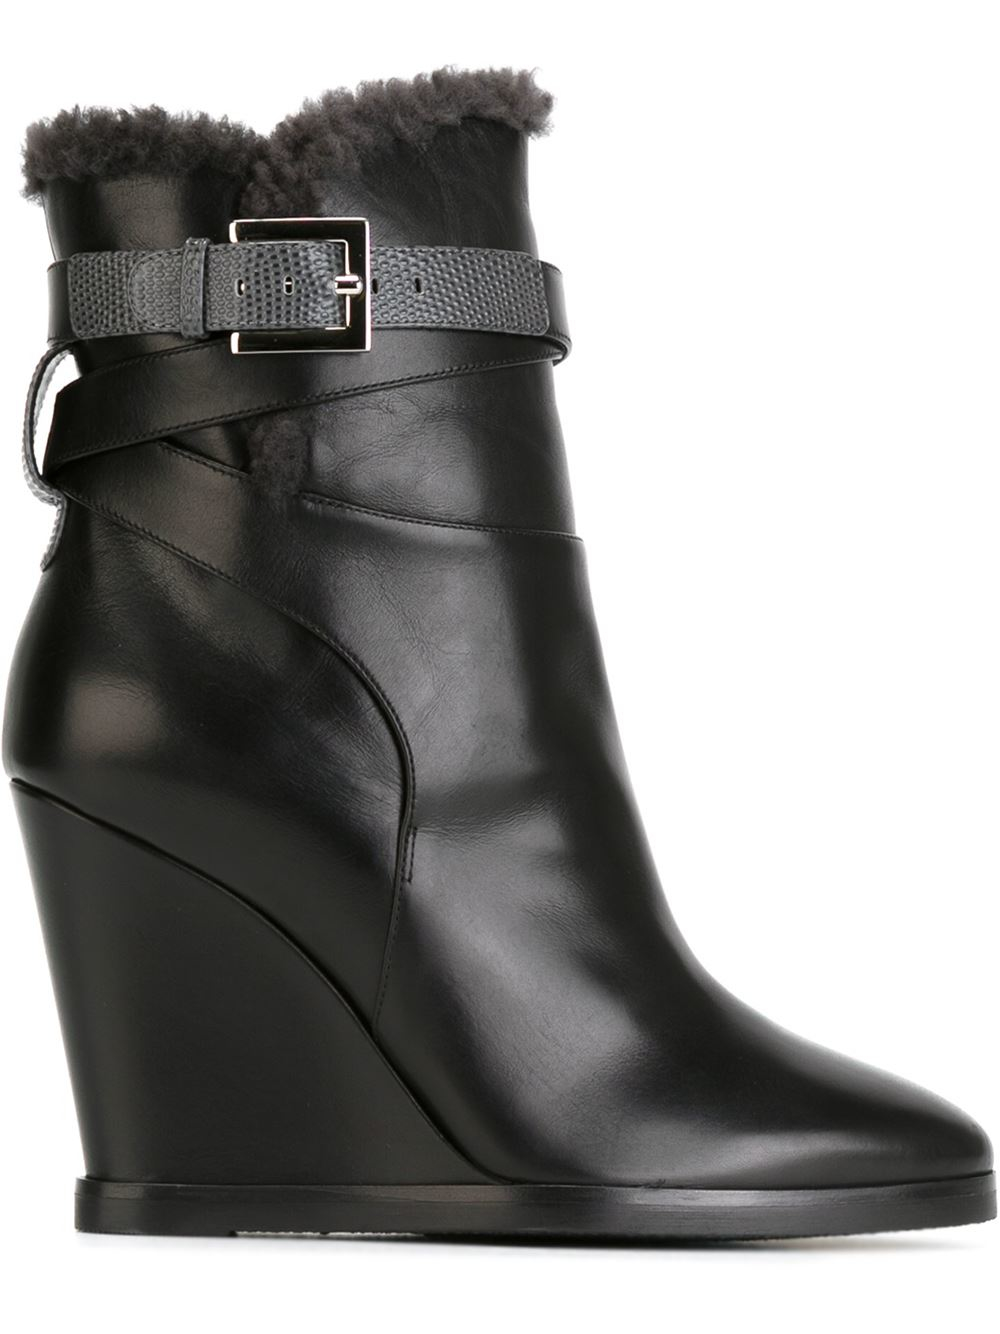 Fendi Leather Wedge Boots in Black - Lyst